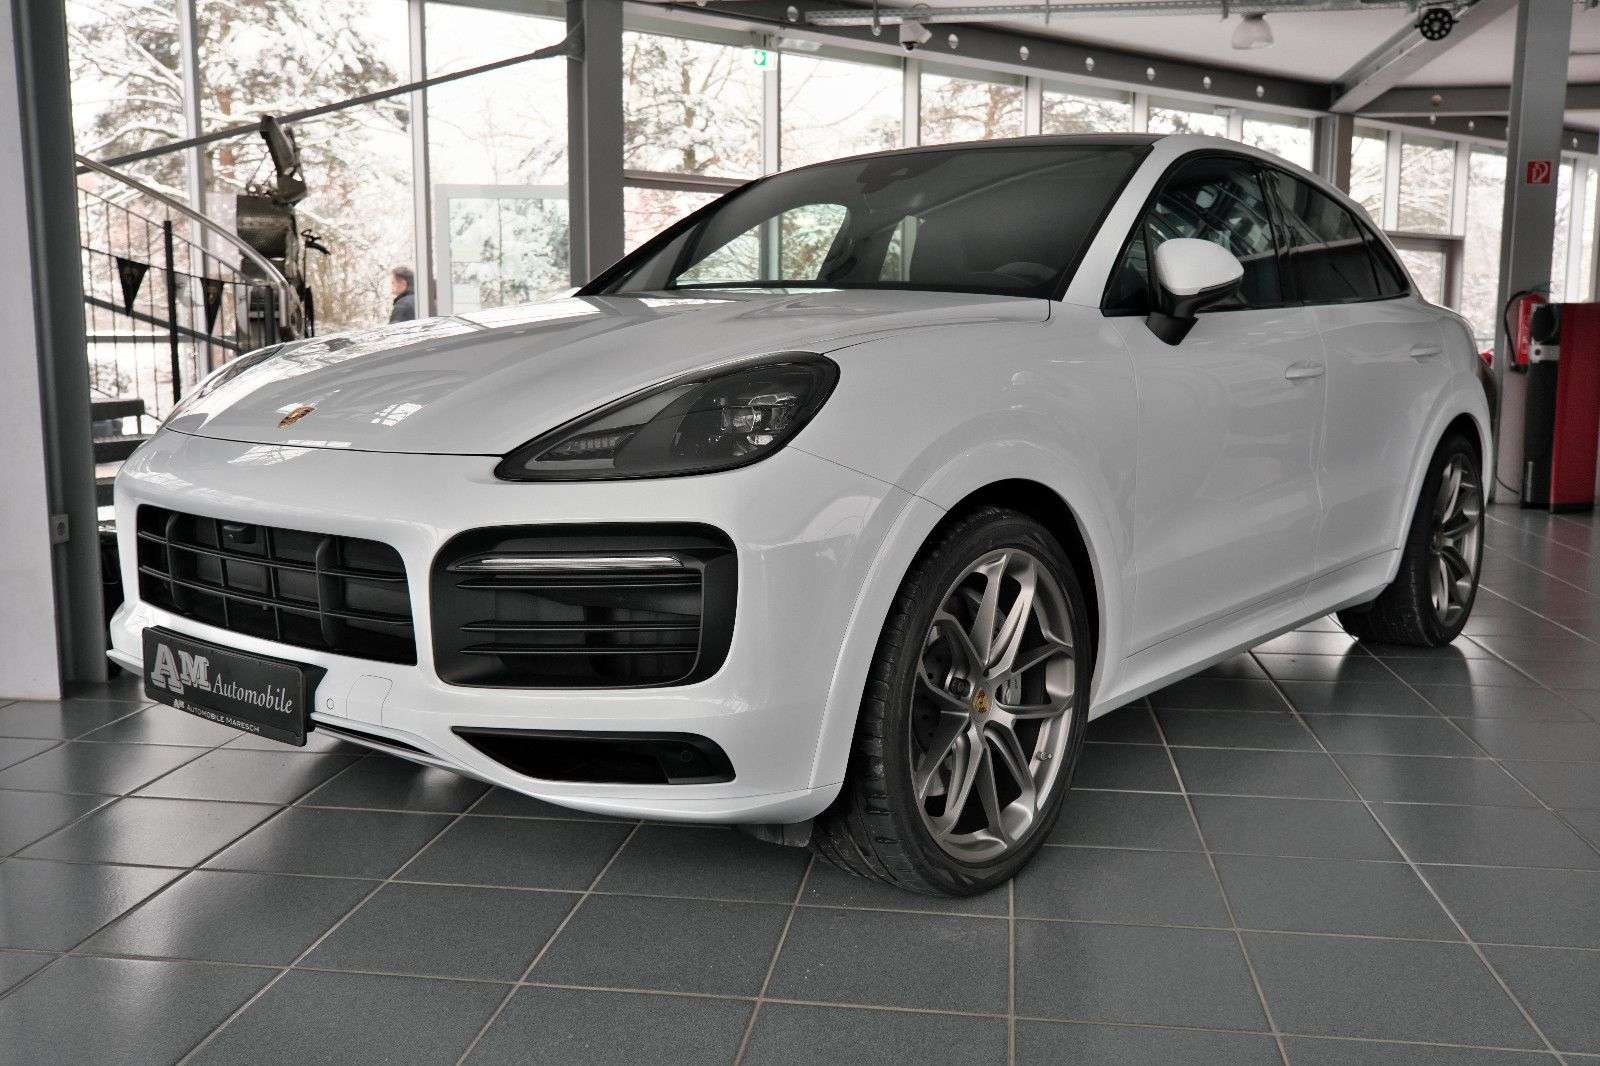 Porsche Cayenne Coupe in White used in München for € 89,800.-